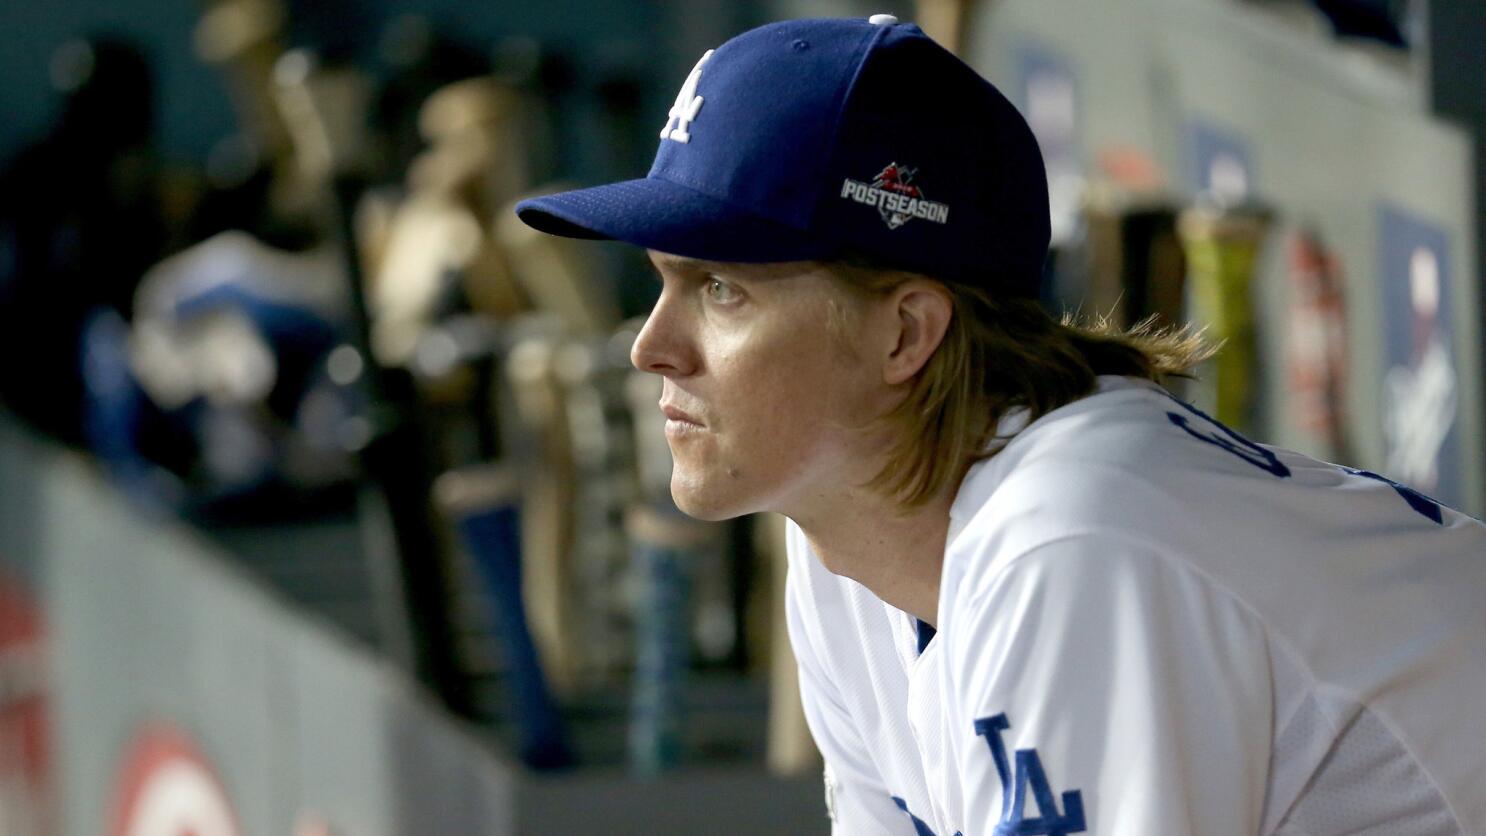 Zack Greinke's Game 5 start against Mets could be his last for